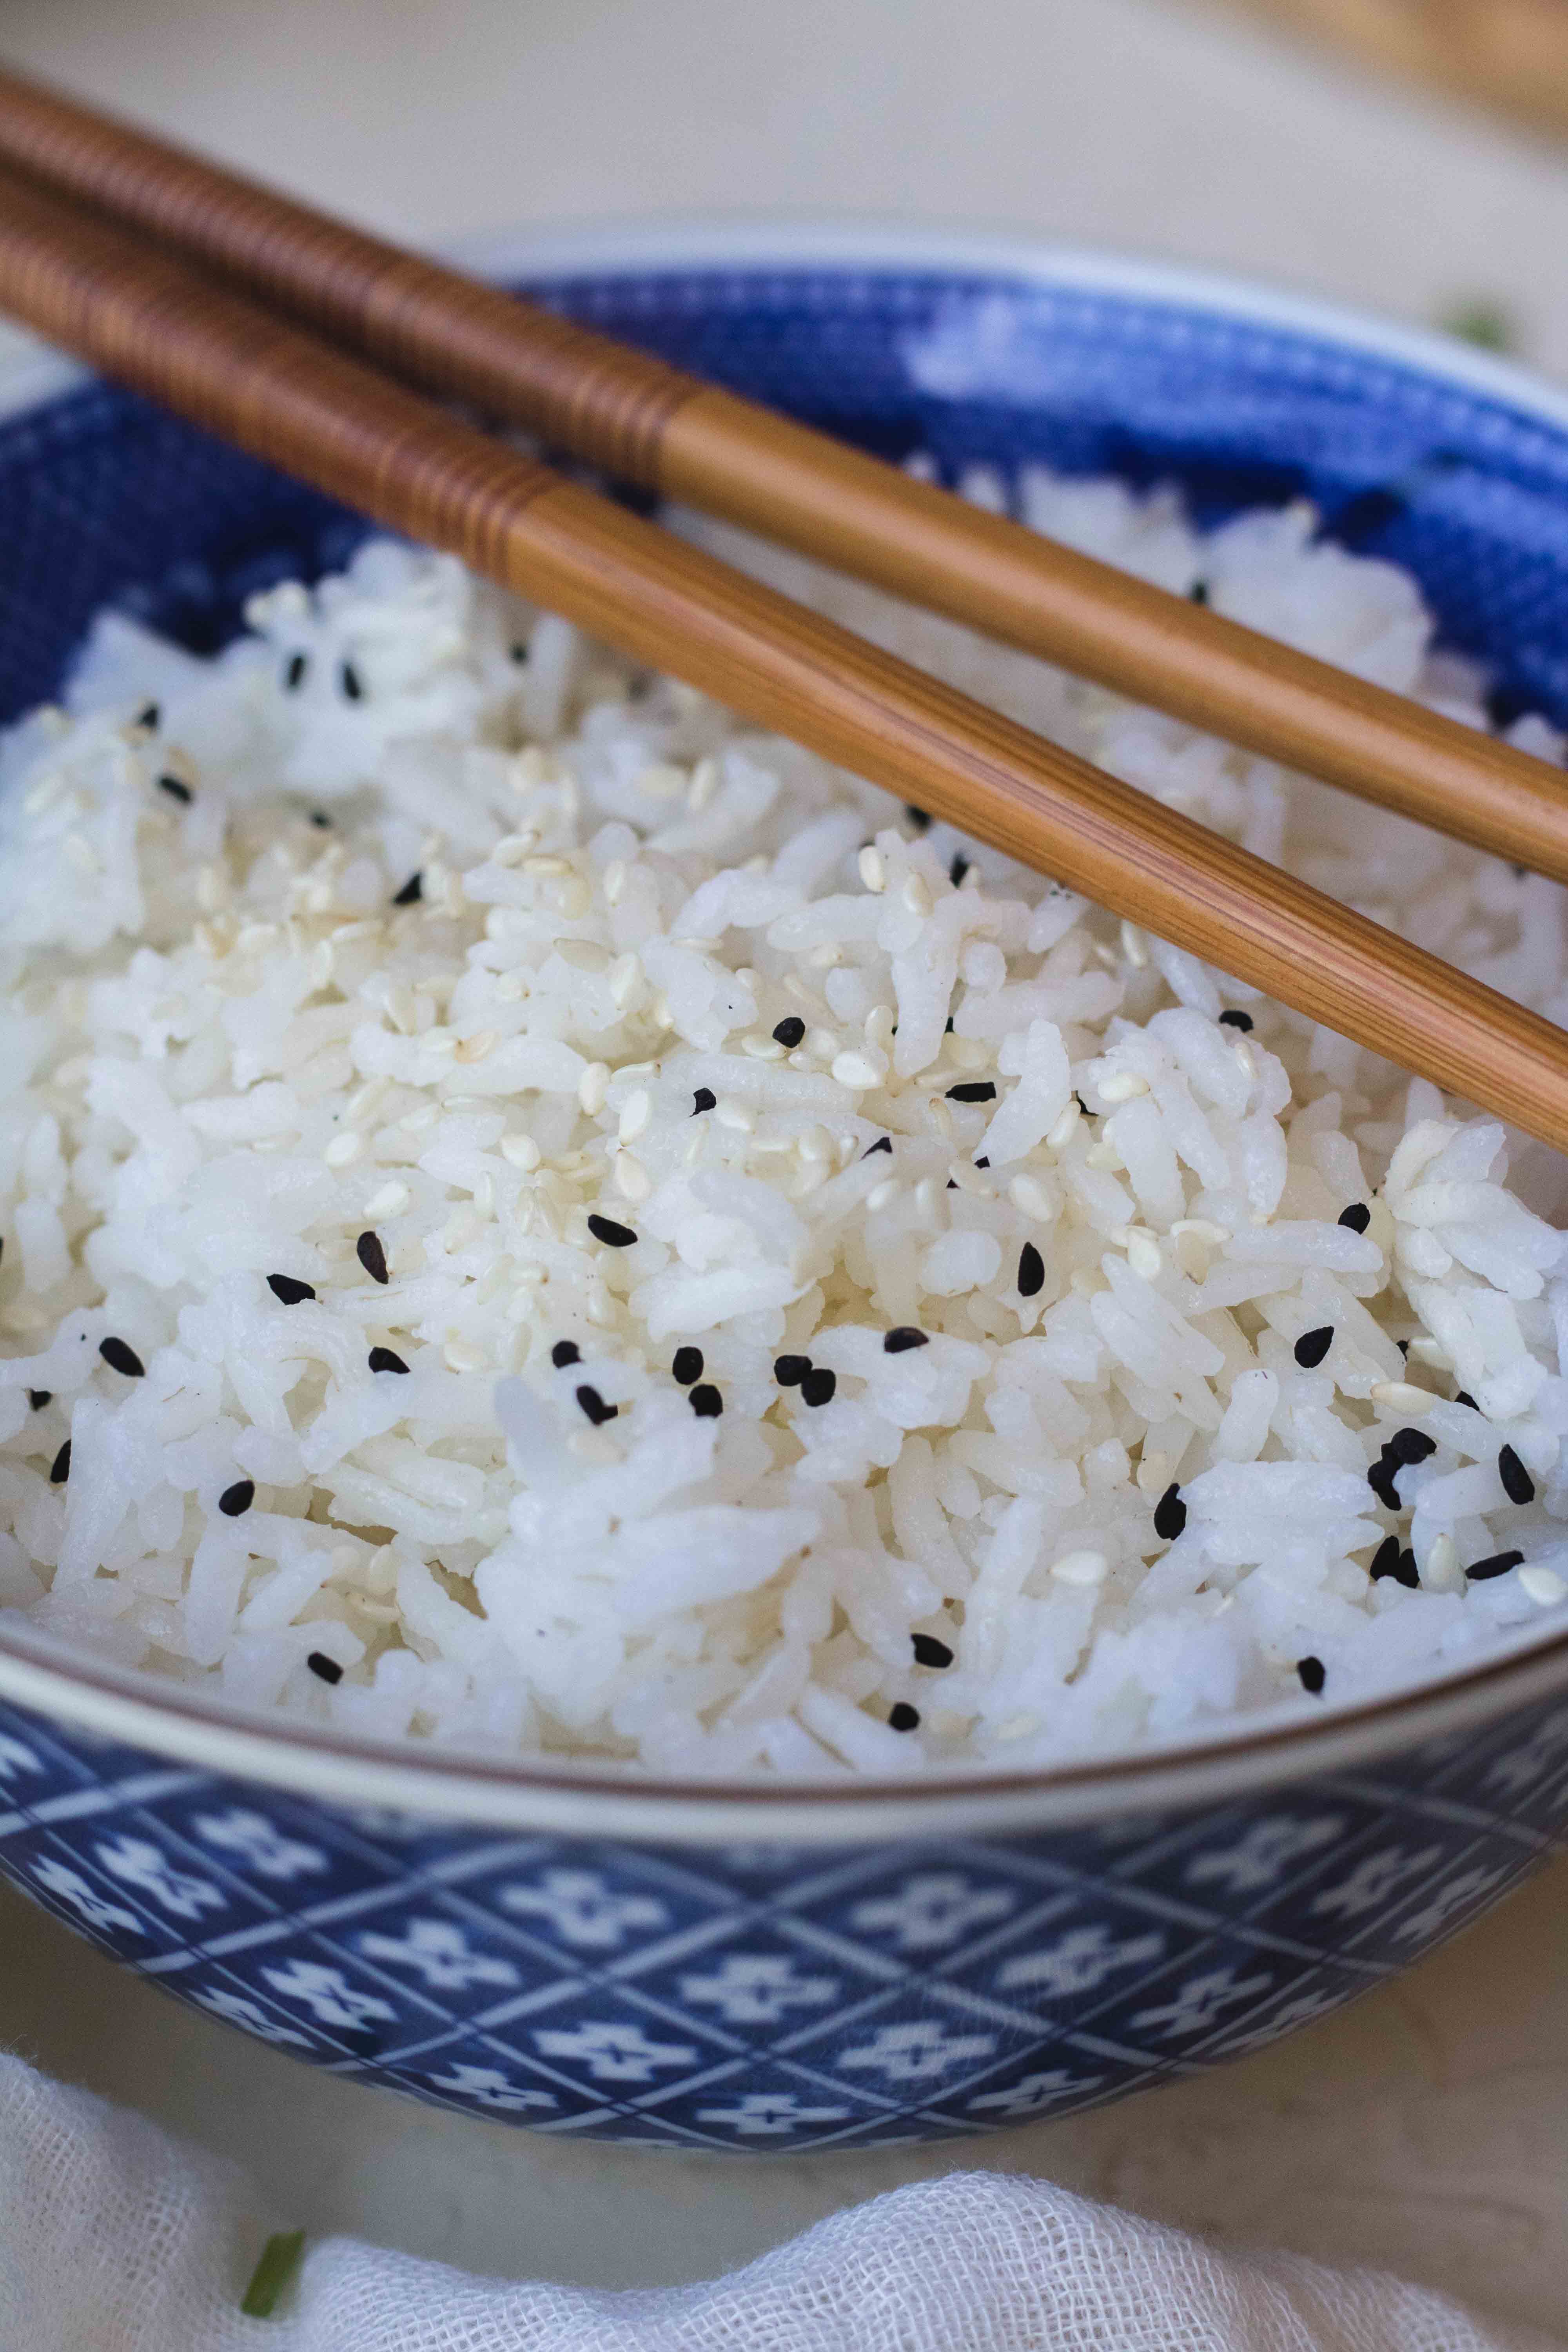 https://lifestyleofafoodie.com/wp-content/uploads/2020/04/How-to-make-the-best-white-rice-on-the-stove-top-14-of-17.jpg